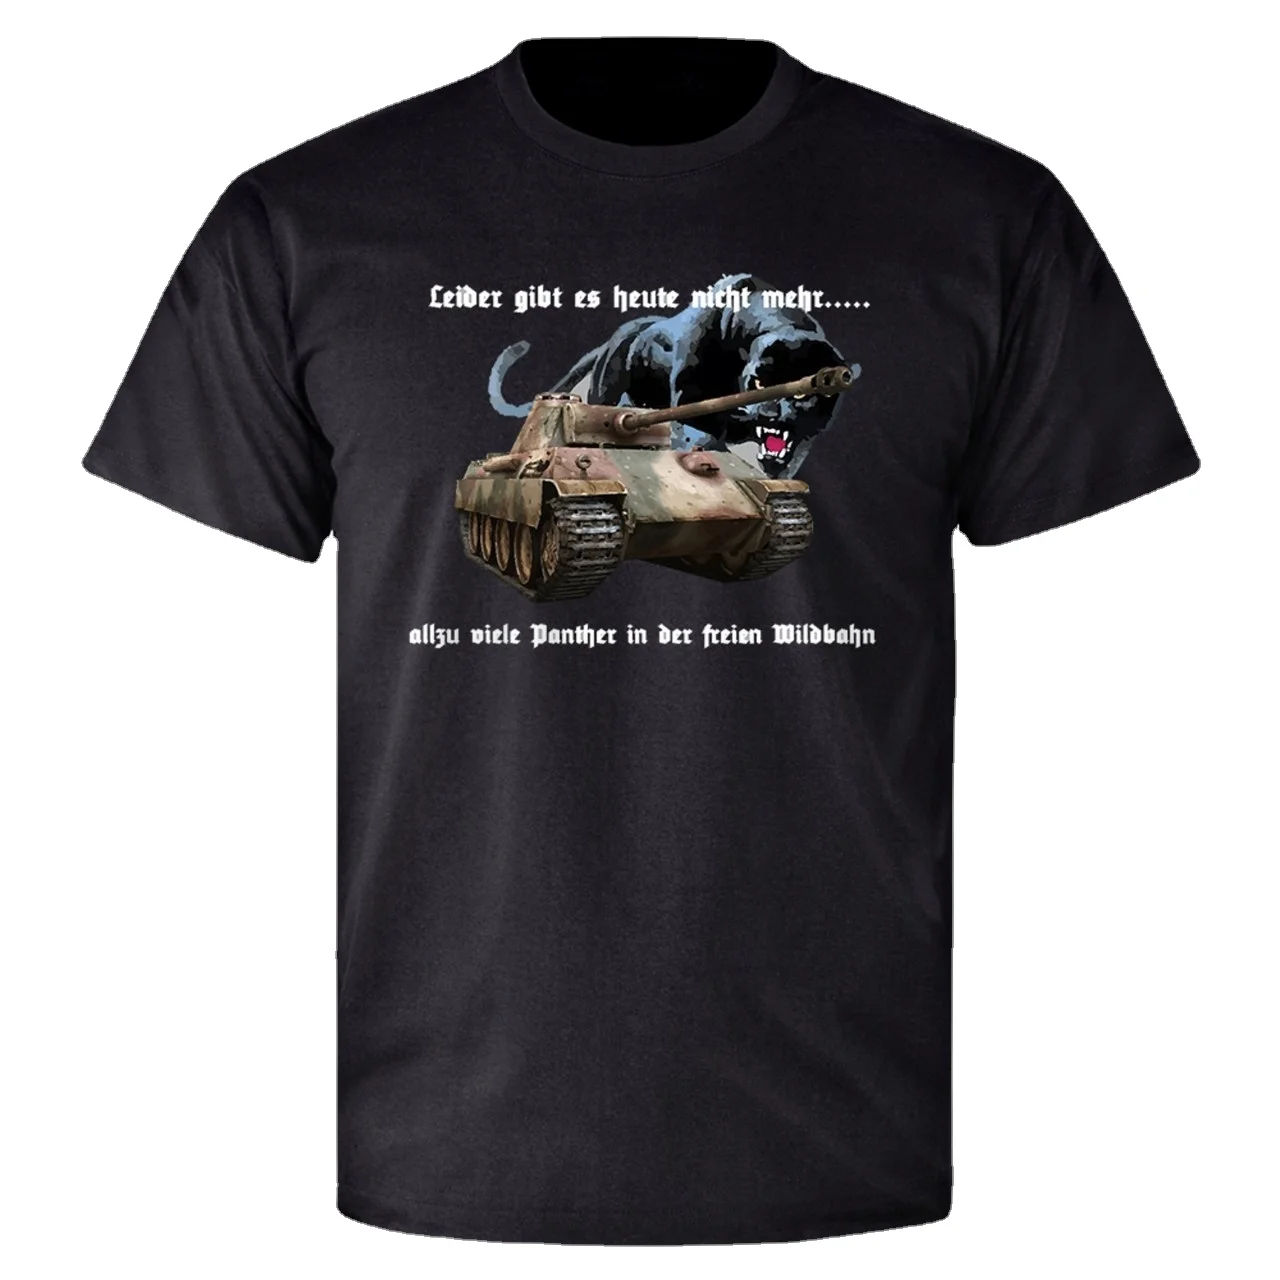 

Wehrmacht Panzer Panther Tank Funny Phrase T-Shirt. Premium Cotton Short Sleeve O-Neck Mens T Shirt New S-3XL